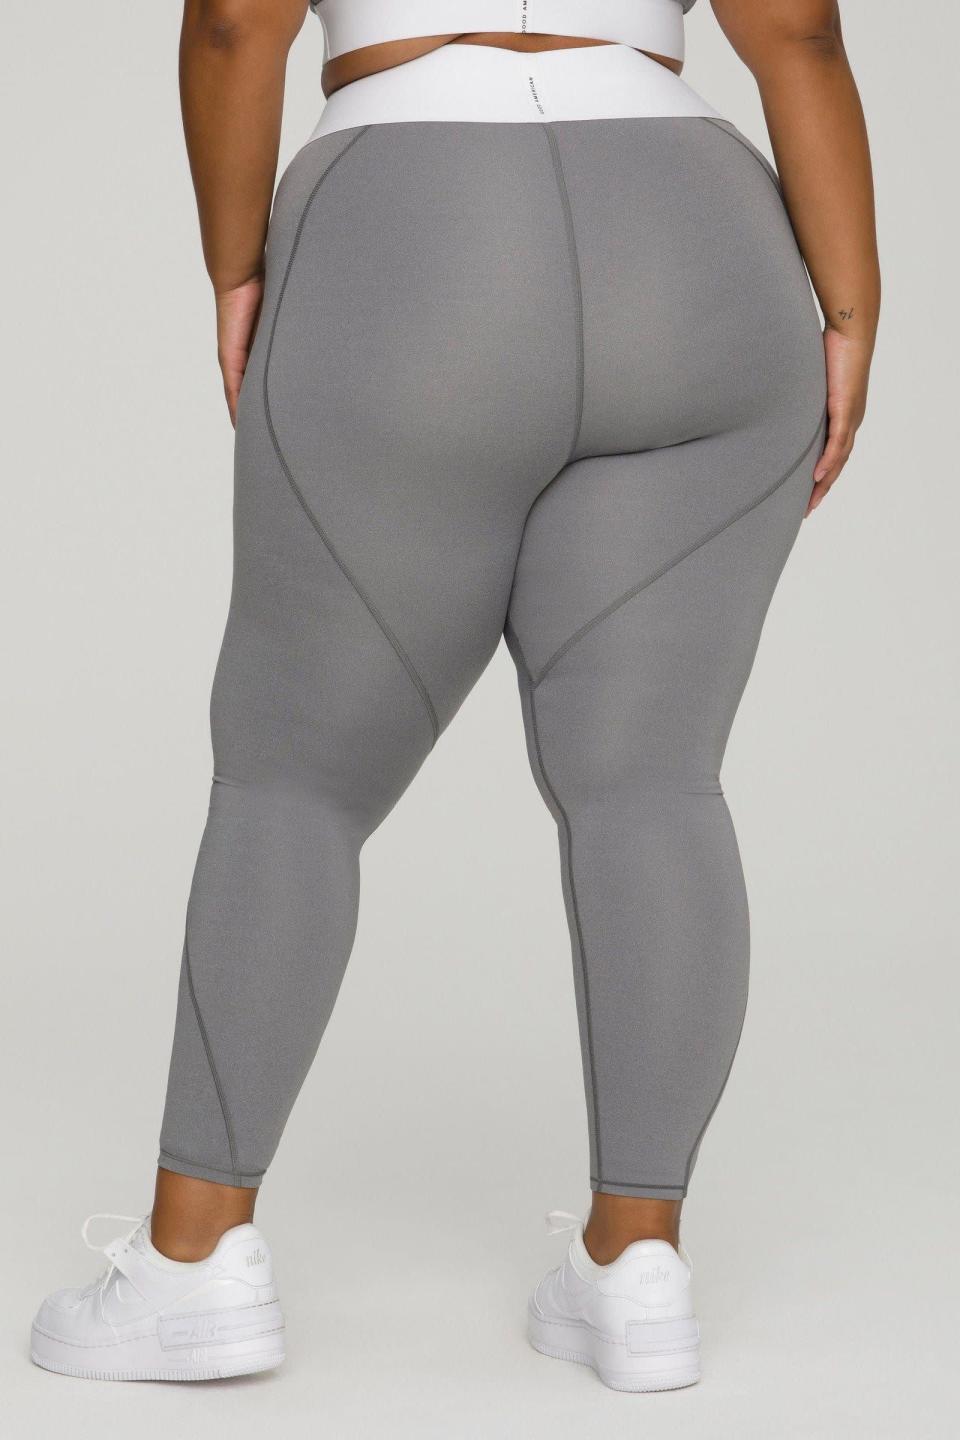 <p>goodamerican.com</p><p><strong>$85.00</strong></p><p><a href="https://go.redirectingat.com?id=74968X1596630&url=https%3A%2F%2Fwww.goodamerican.com%2Fproducts%2Ficon-core-legging-grey001&sref=https%3A%2F%2Fwww.cosmopolitan.com%2Fhealth-fitness%2Fg26305843%2Fbutt-sculpting-leggings%2F" rel="nofollow noopener" target="_blank" data-ylk="slk:Shop Now" class="link ">Shop Now</a></p><p>Good American is widely known for its fit and its Active Essential Icon legging is a testament to that. The new and improved silhouette comes with curved stitching that brings attention to your booty—aka le point of this story.</p><p><strong>THE REVIEWS:</strong> <em>"I was very hesitant to get them because I never buy anything online, especially leggings. These really are my new favorite pair because they’re squat proof and sweat proof. IYKYK."</em></p>